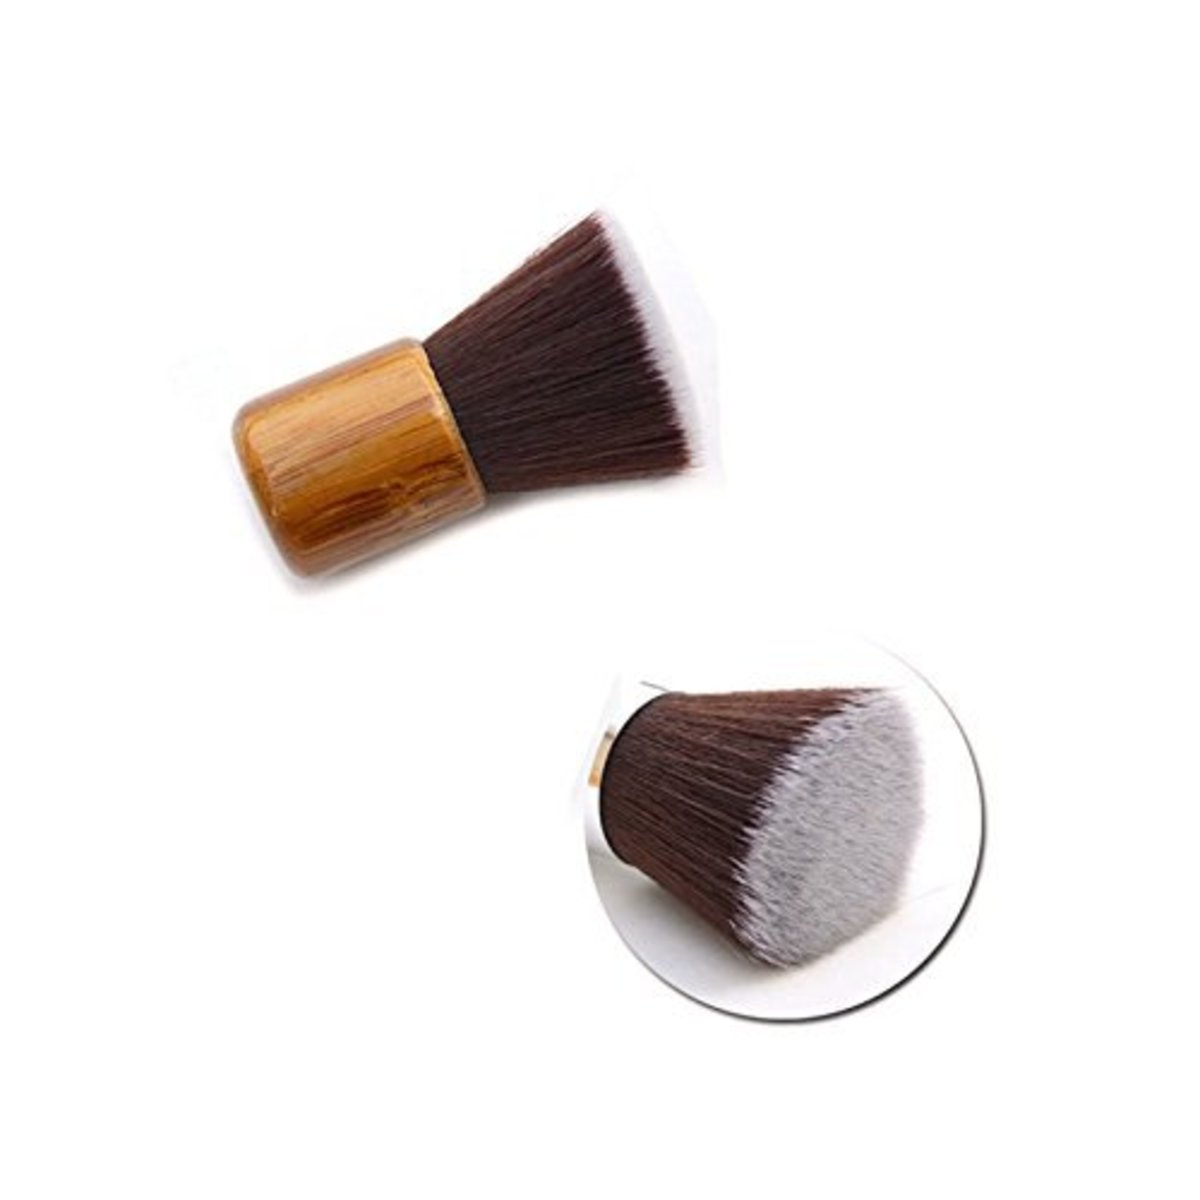 50 Types of Makeup Brushes and Their Uses - Your Complete and ...